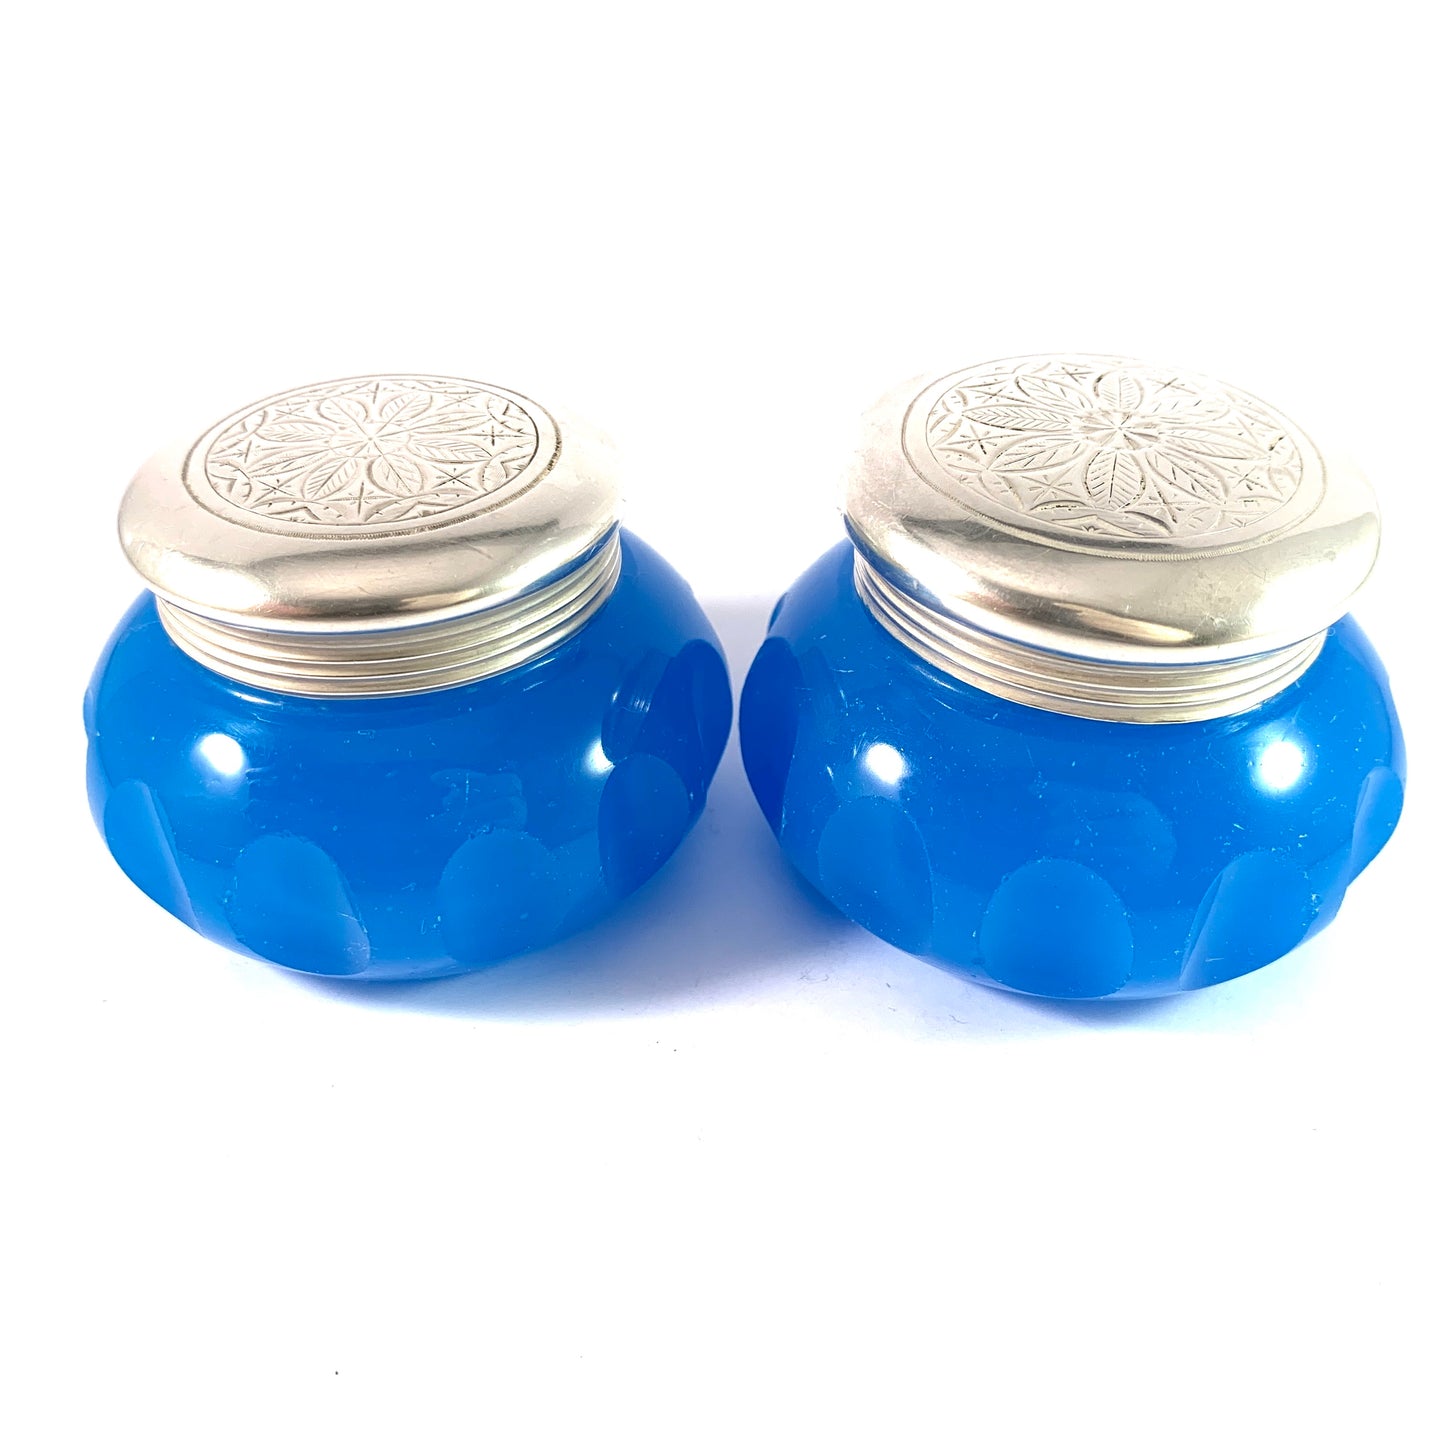 Sweden year 1866. Victorian Solid Silver Topped Blue Opaline Glass Jars